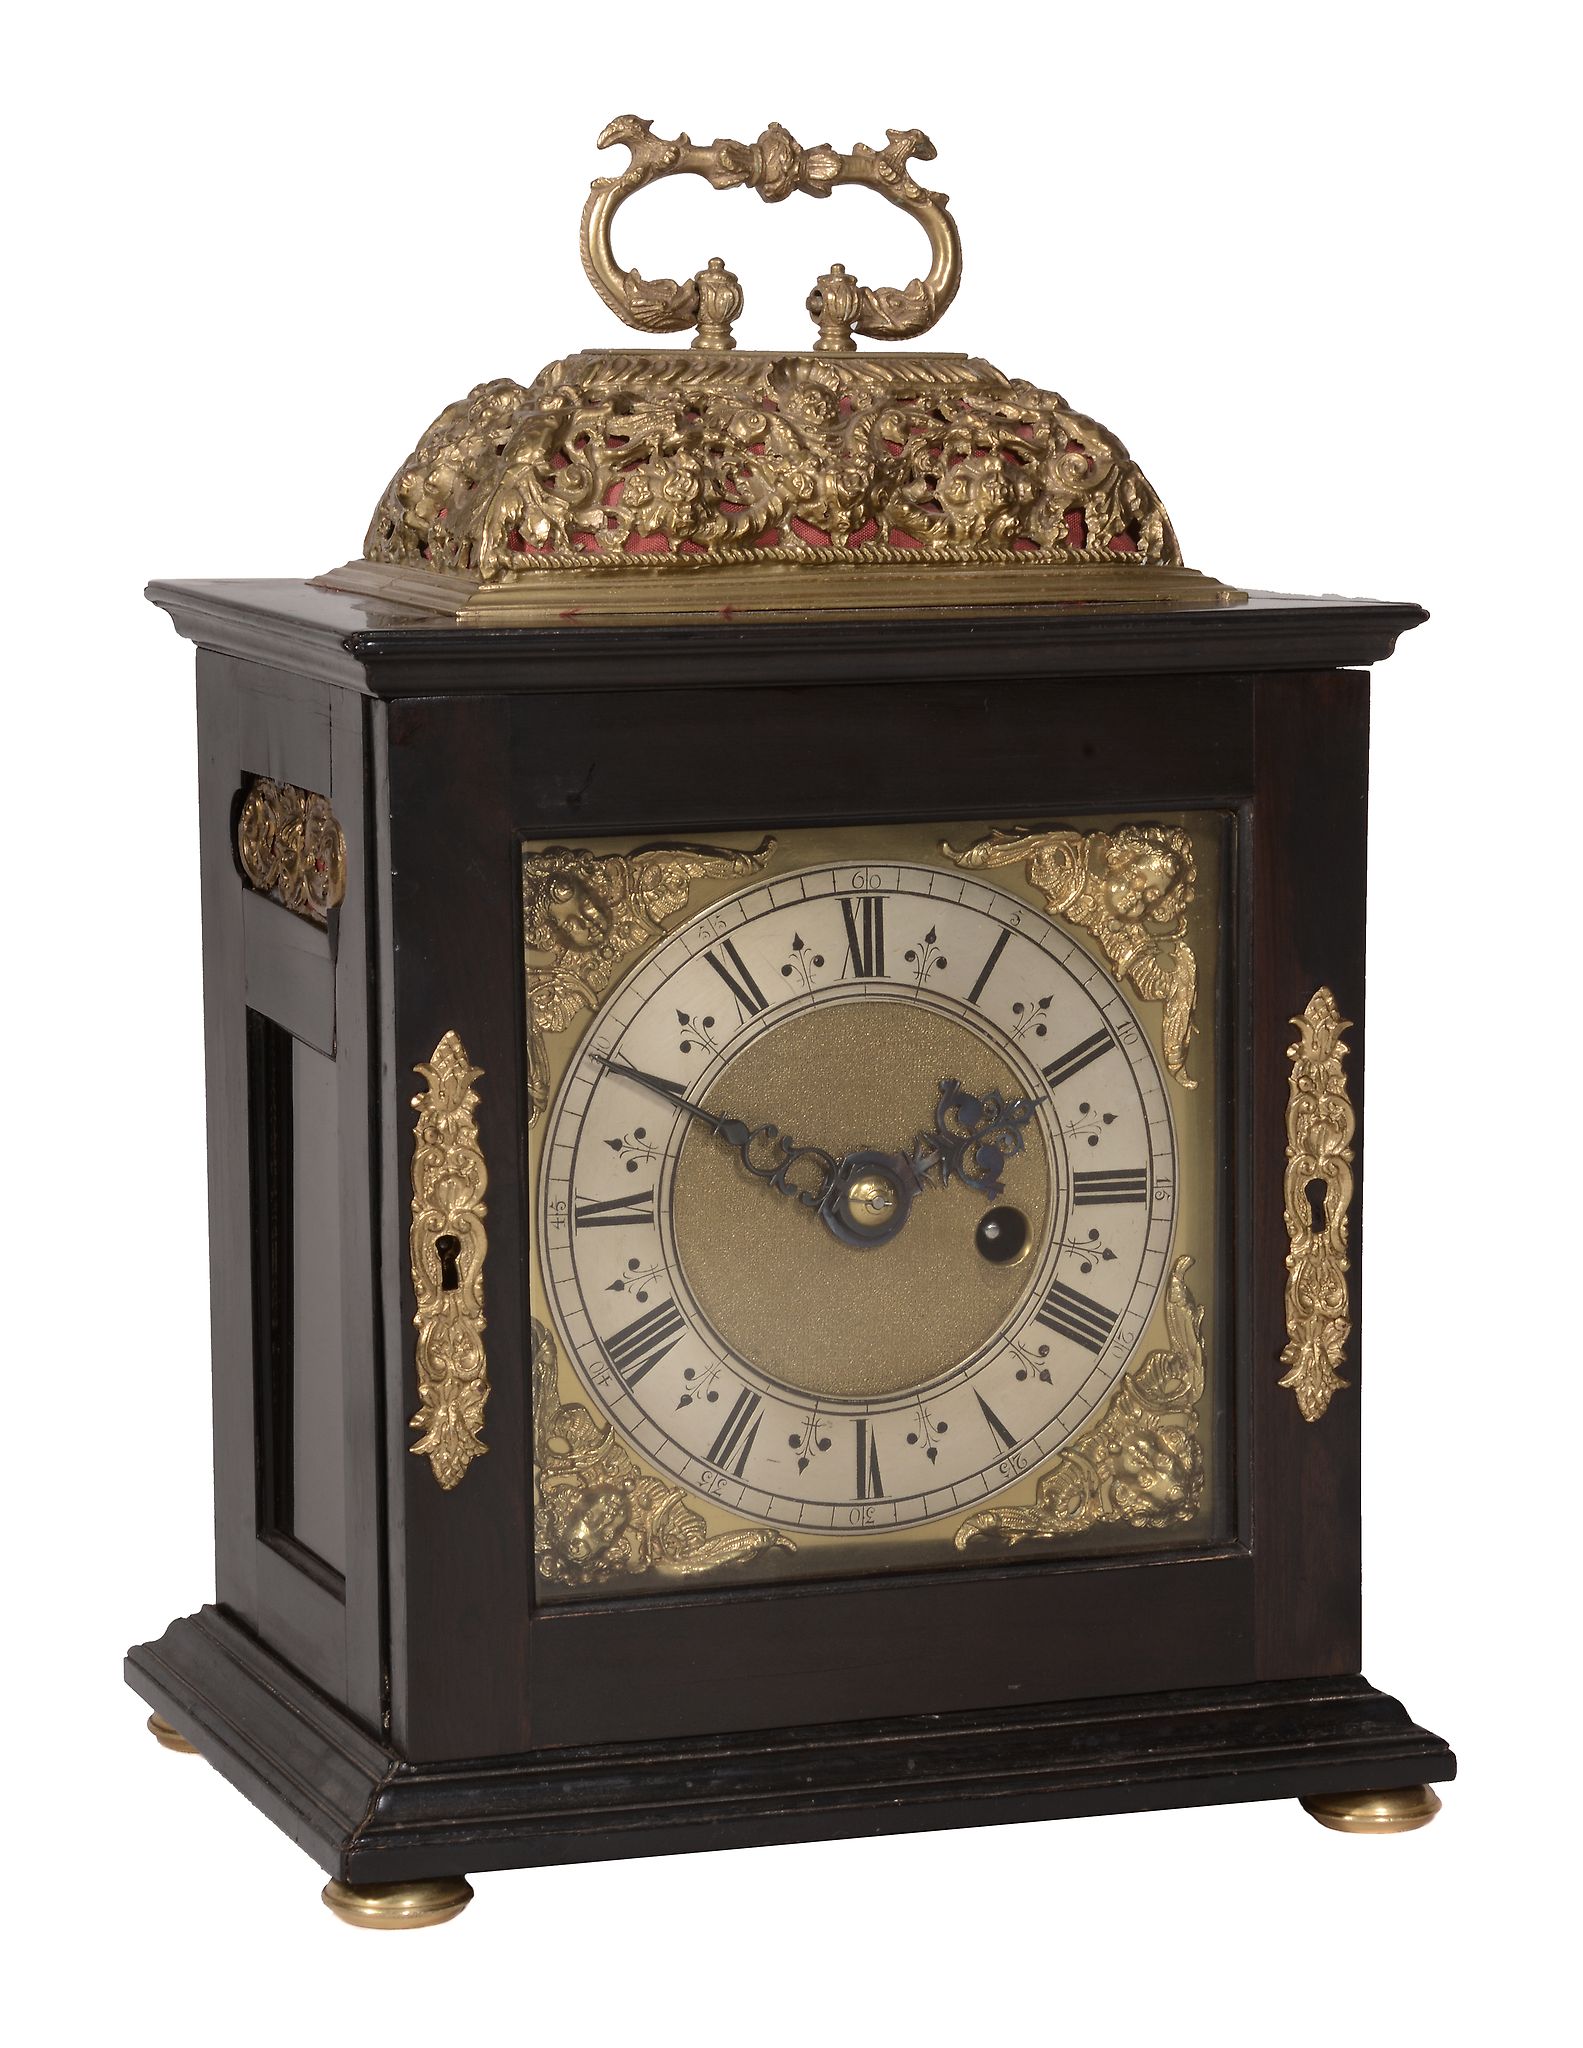 A fine James II gilt brass mounted ebony small basket top table timepiece with silent-pull quarter-